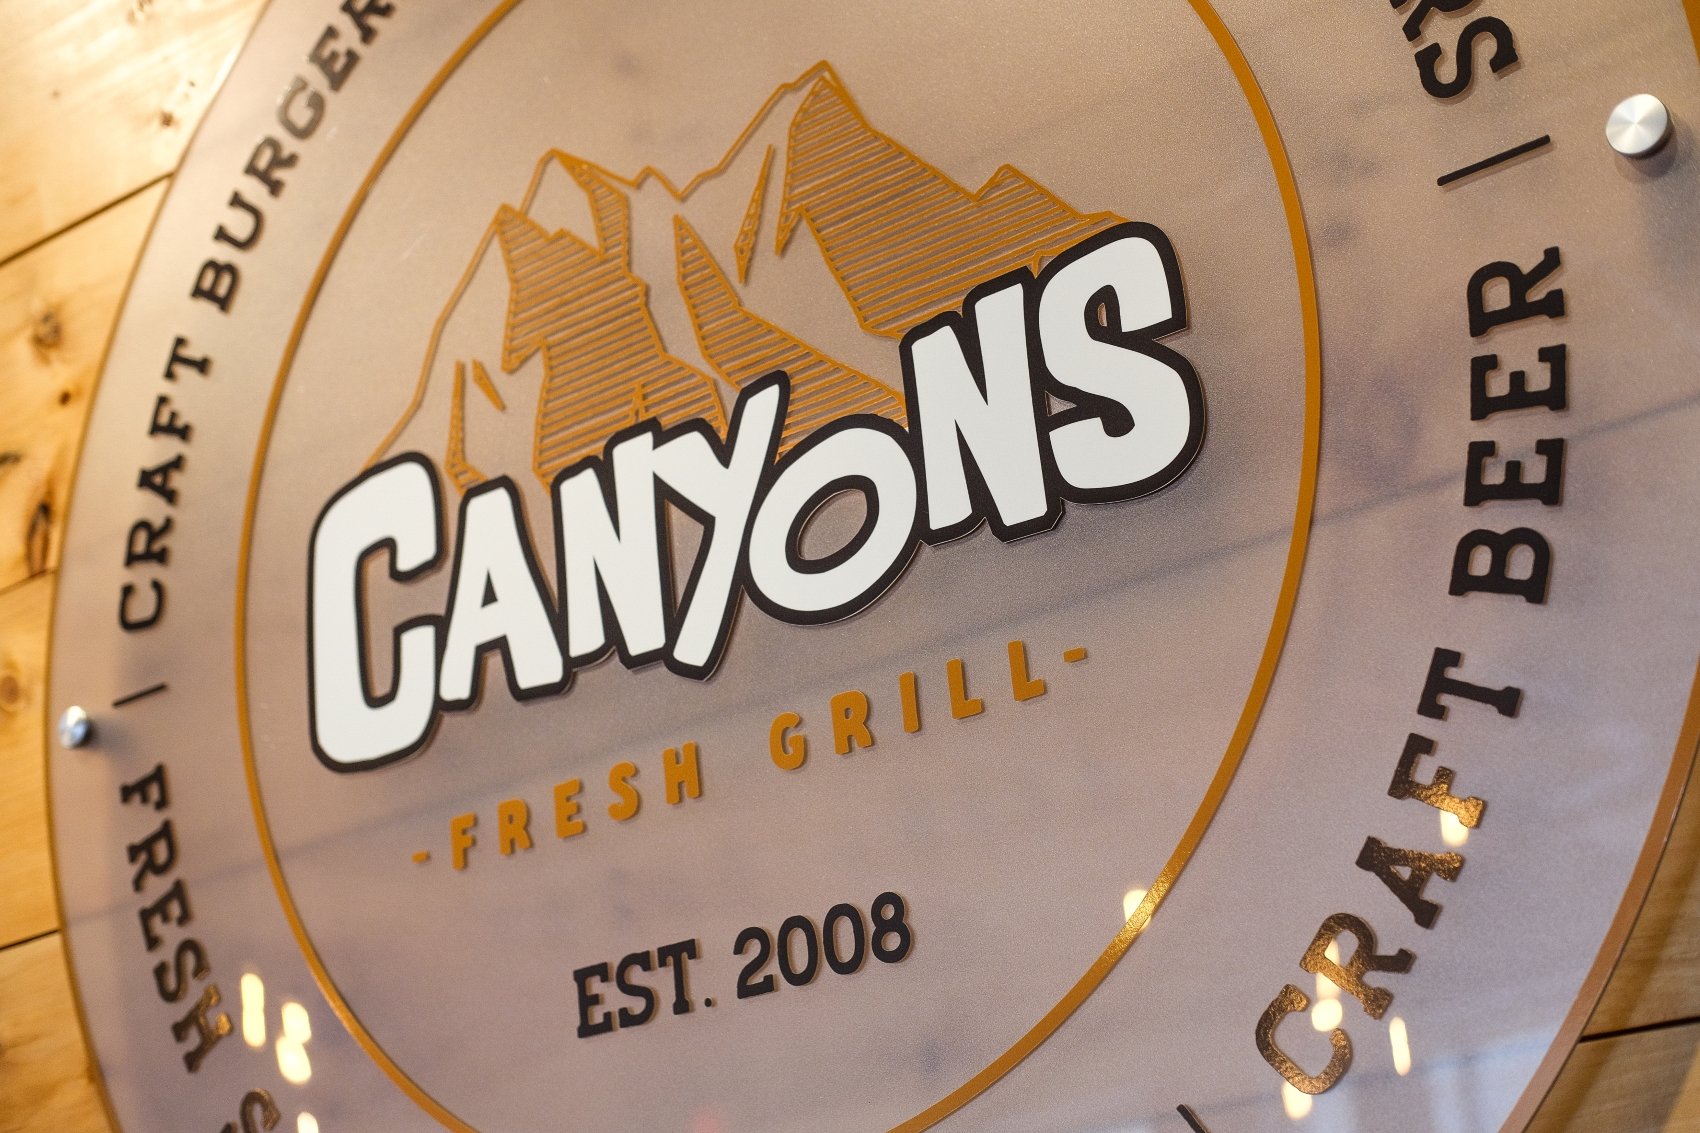 About - Canyons Fresh Grill